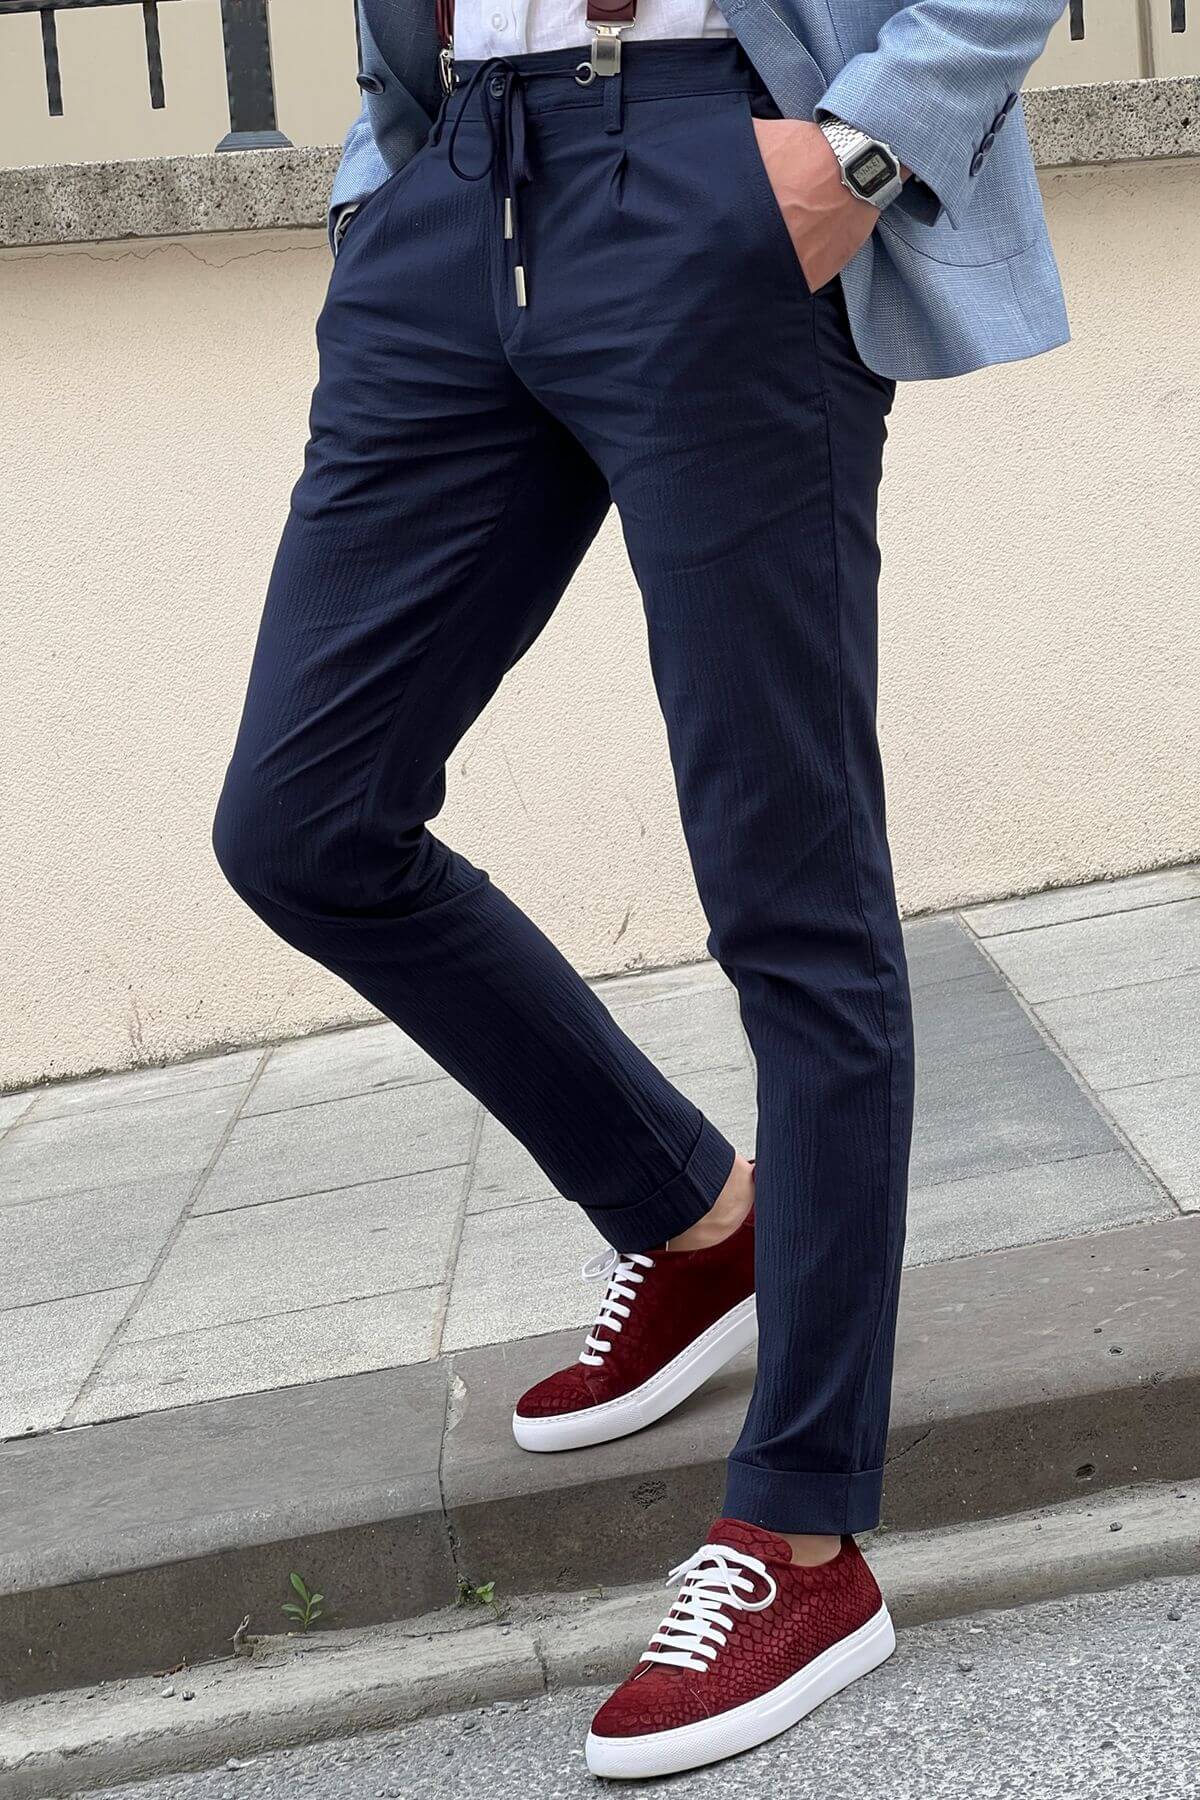 A Slim Fit Navy Blue Trouser on display